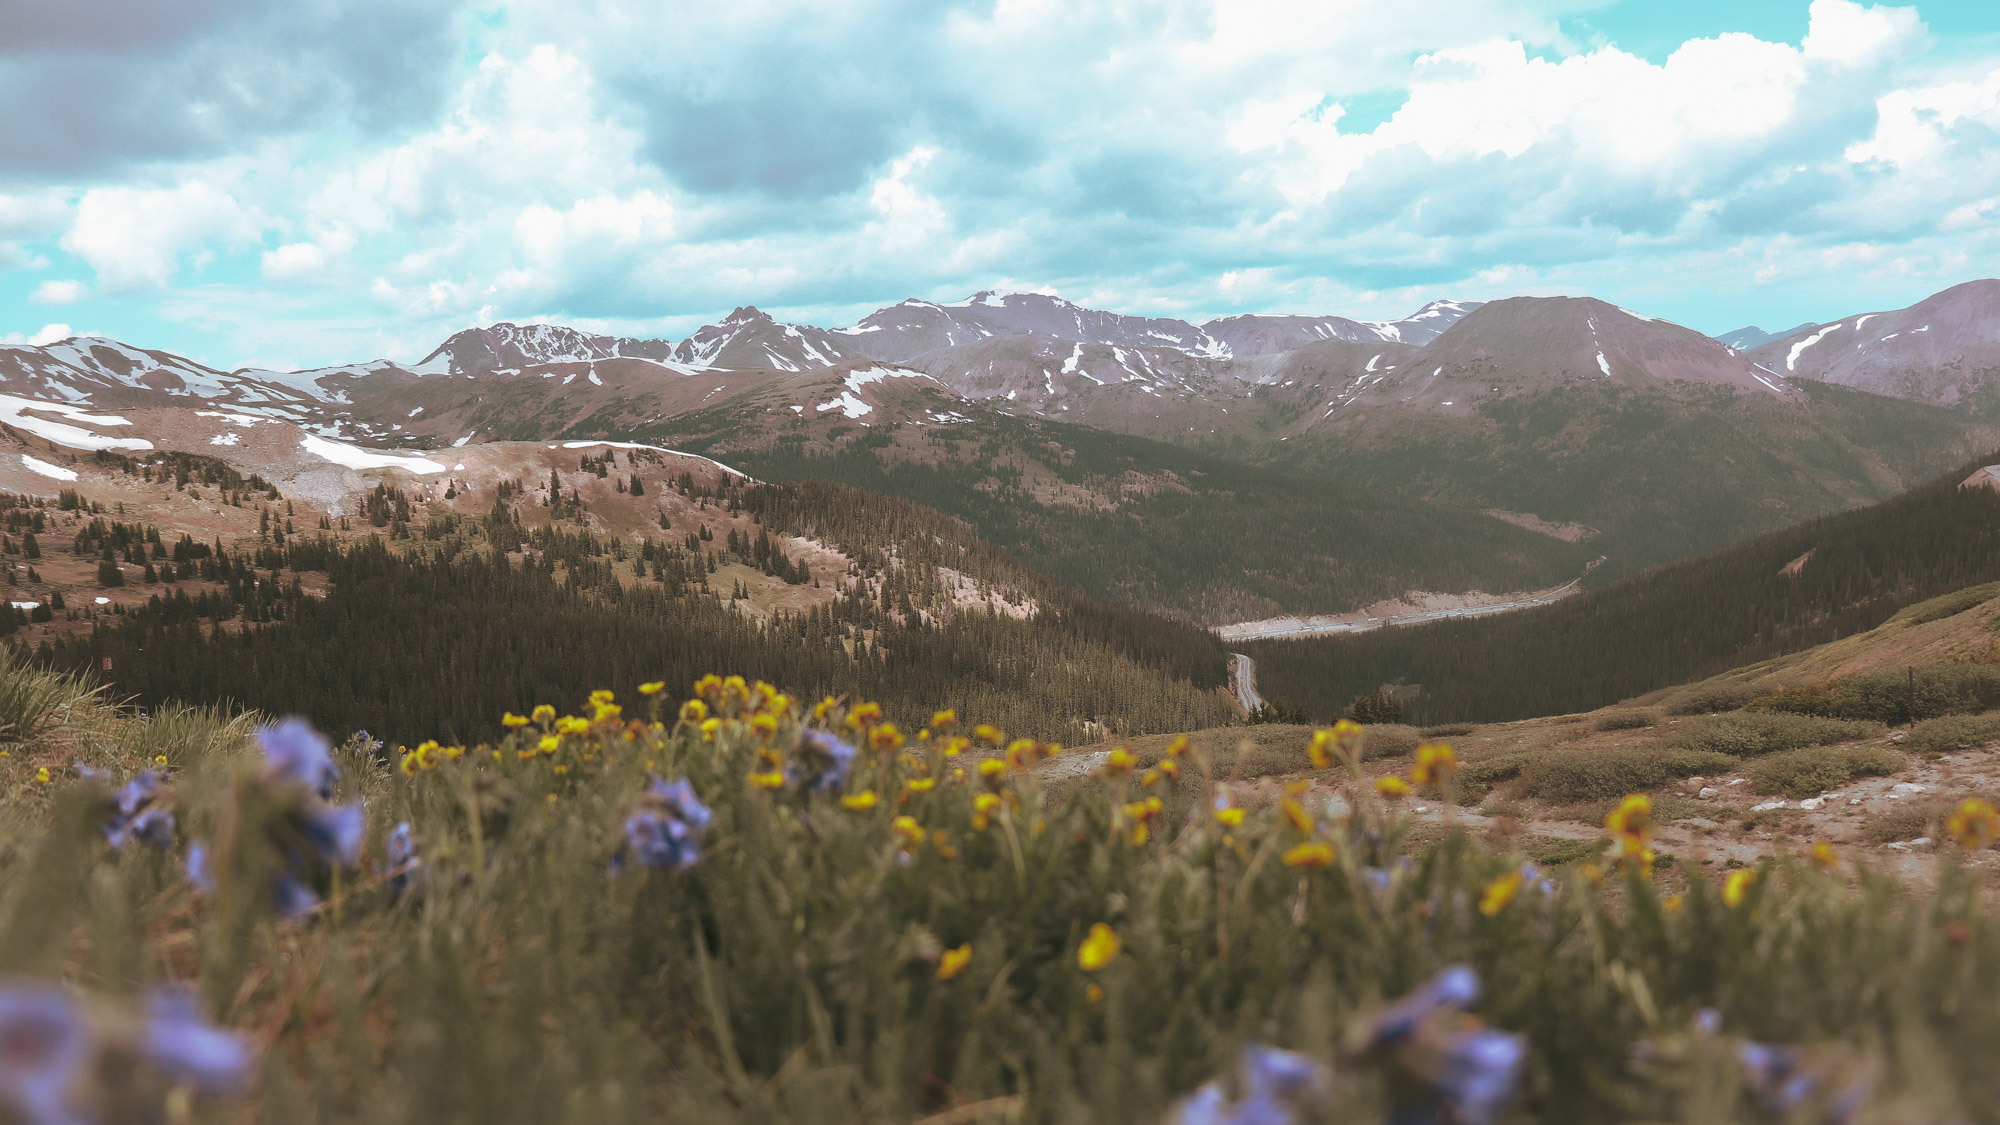 Looking east from the continental divide, into Clear Creek County Colorado. The spring flowers find a way to add a pop of color into the green and brown landscape.